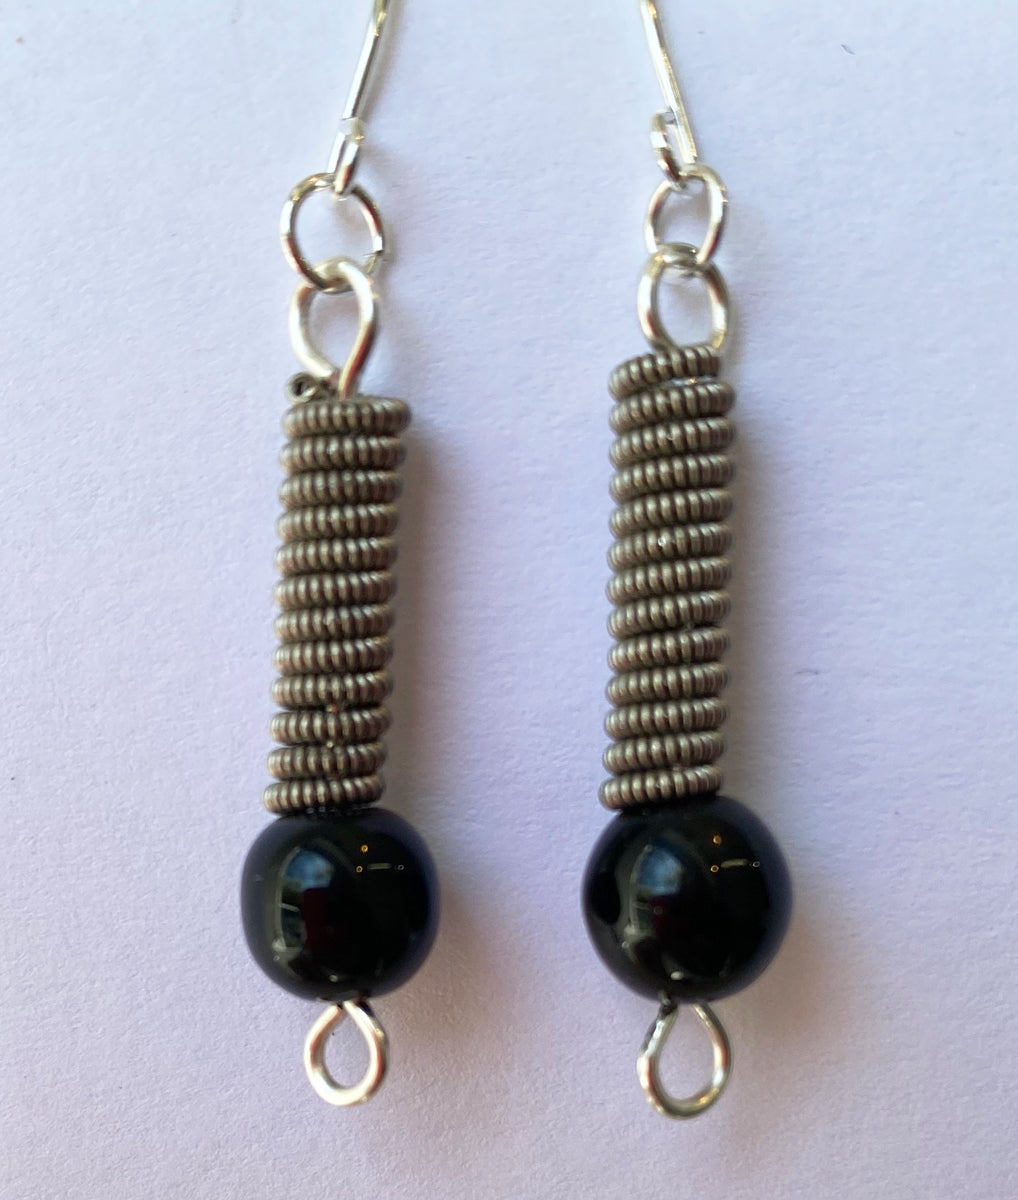 44.Stainless Guitar String Earring with Beads